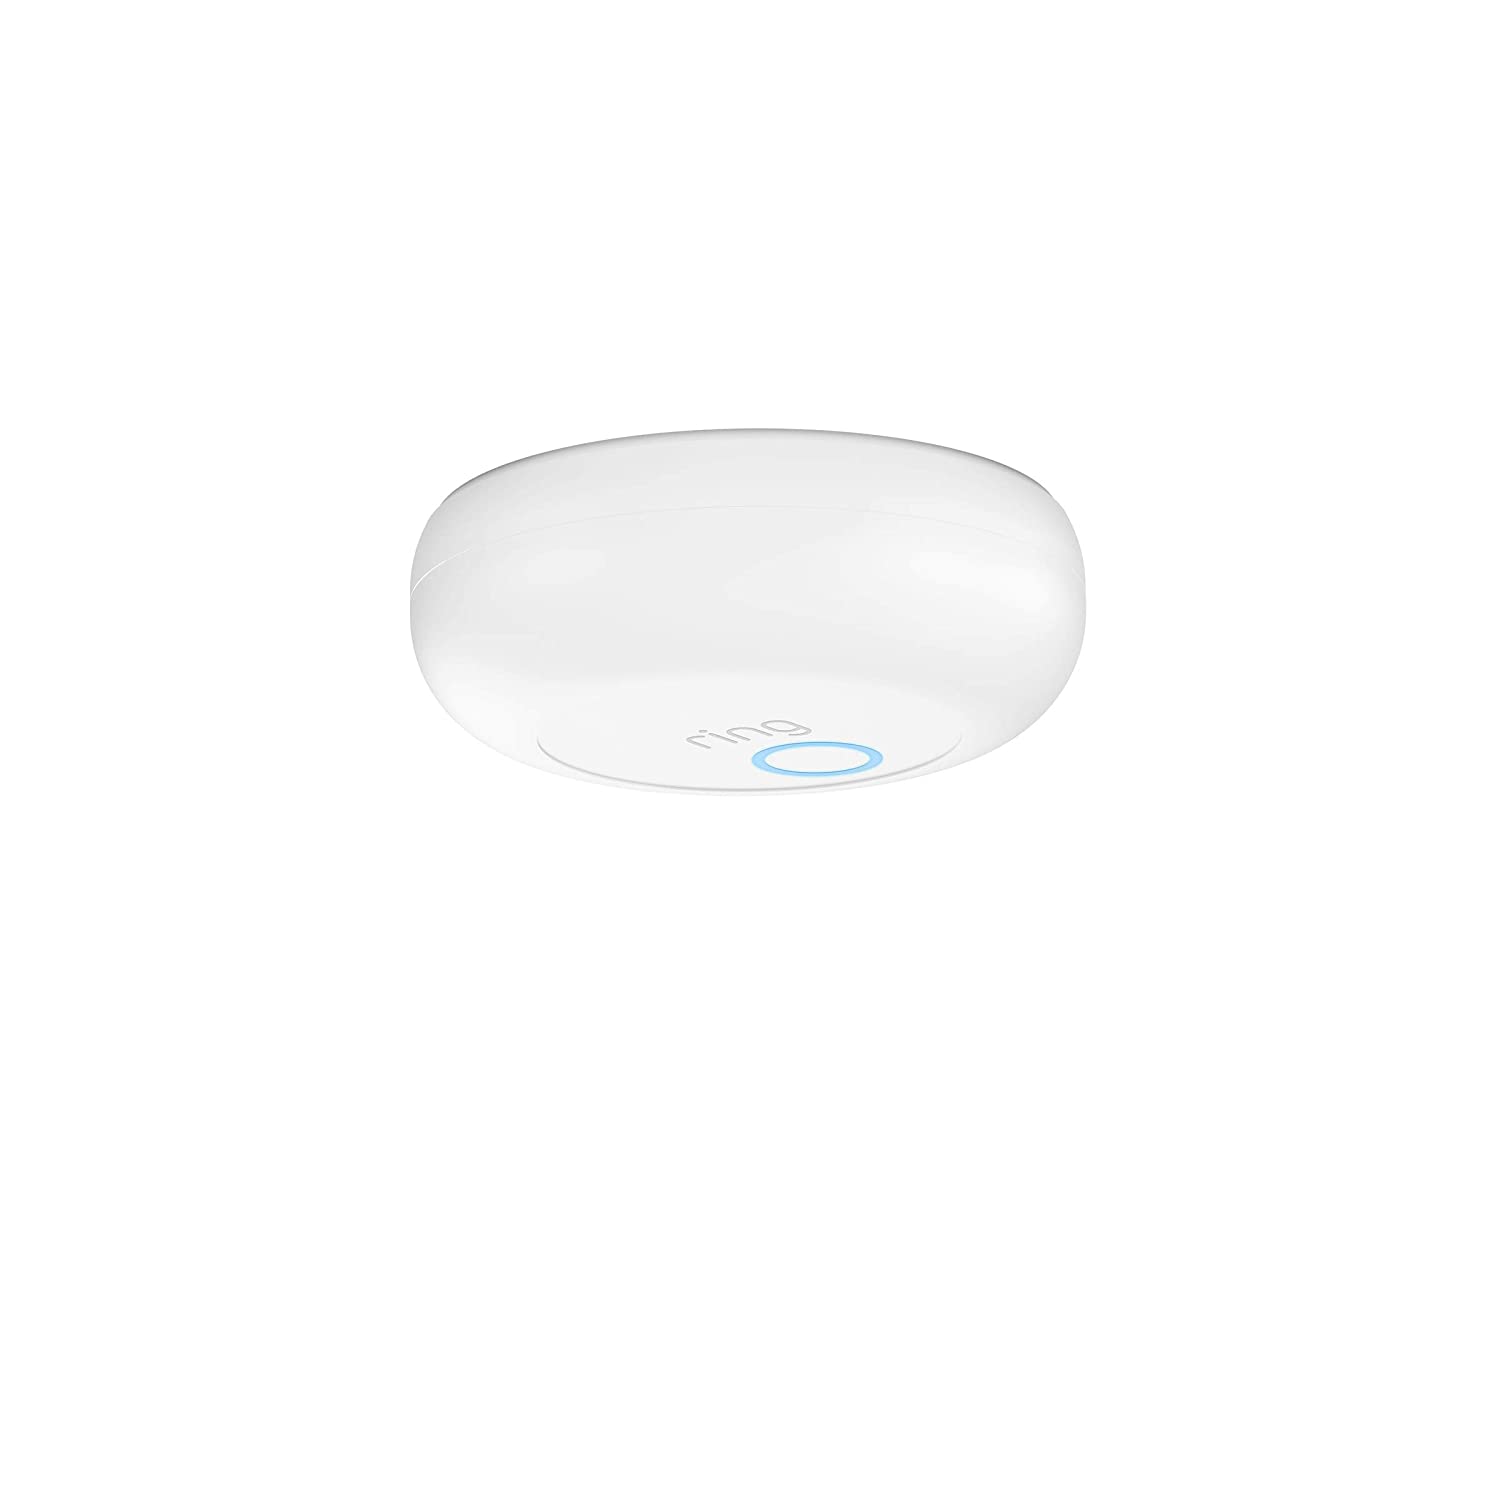 Ring Alarm Smoke and CO Listener - White (New)